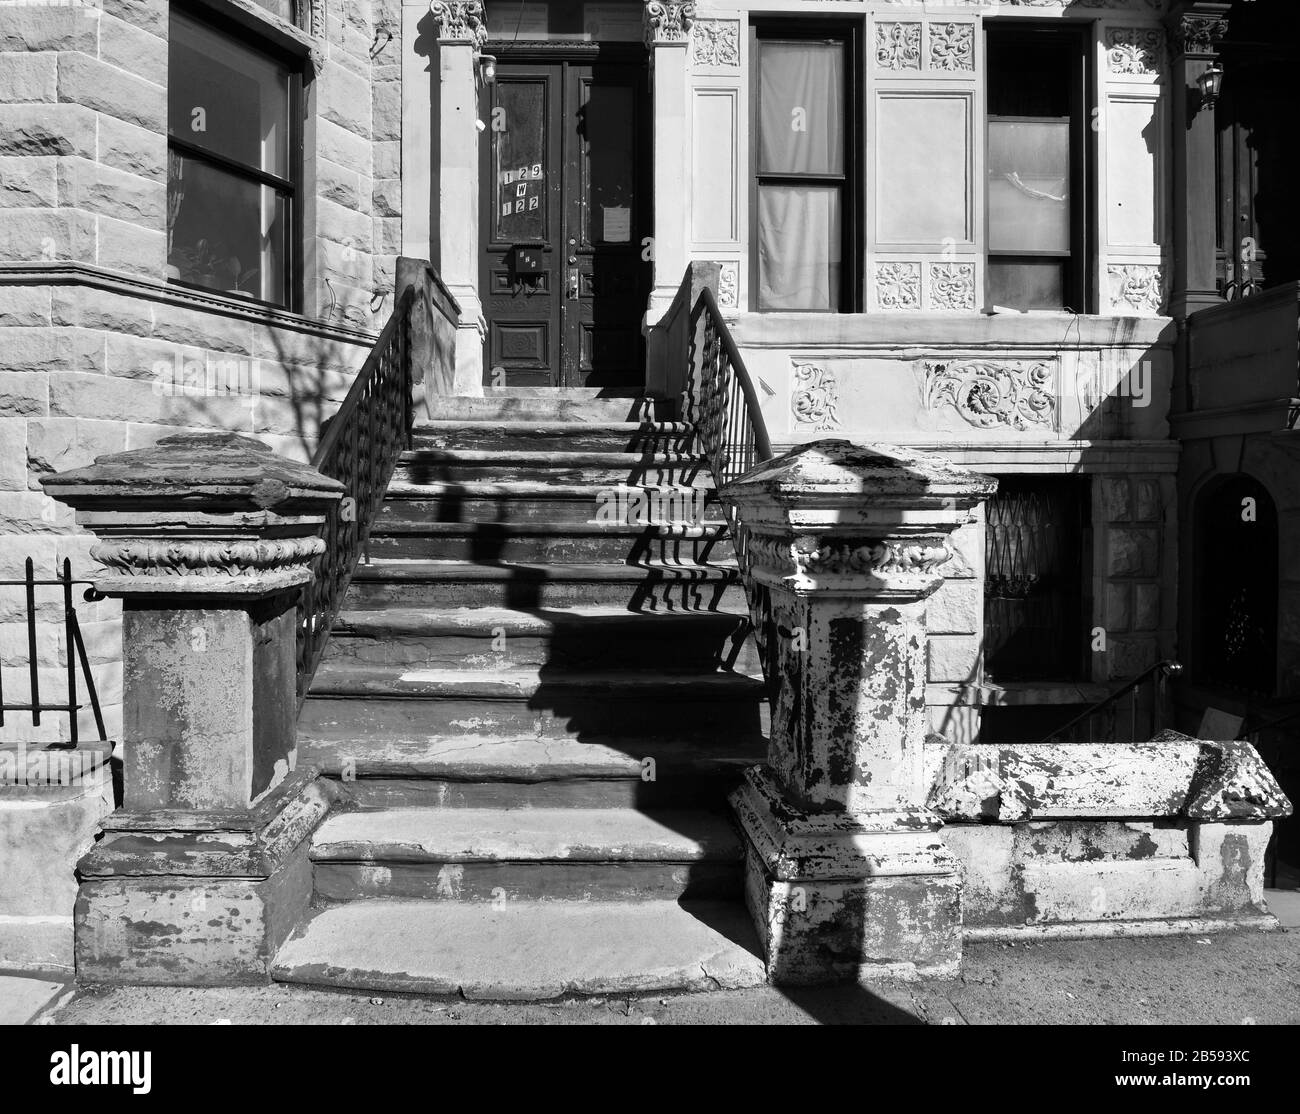 Harlem Street view, New York City, USA Banque D'Images